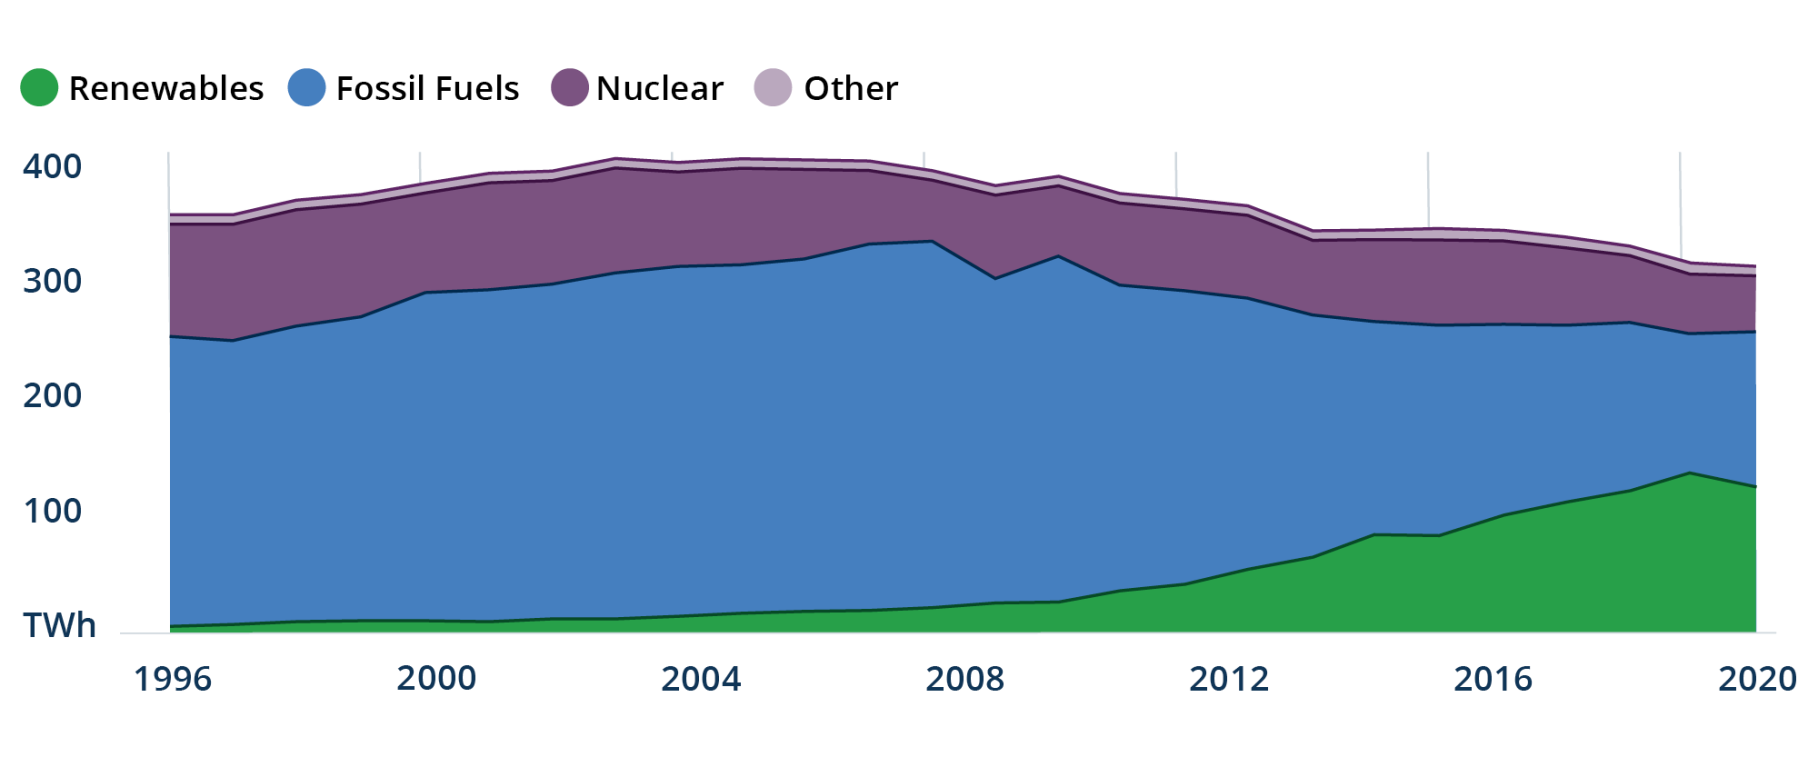 Figure 4: Fossil Fuels Still Account for Almost 40% of Britain's Electricity Generation Mix